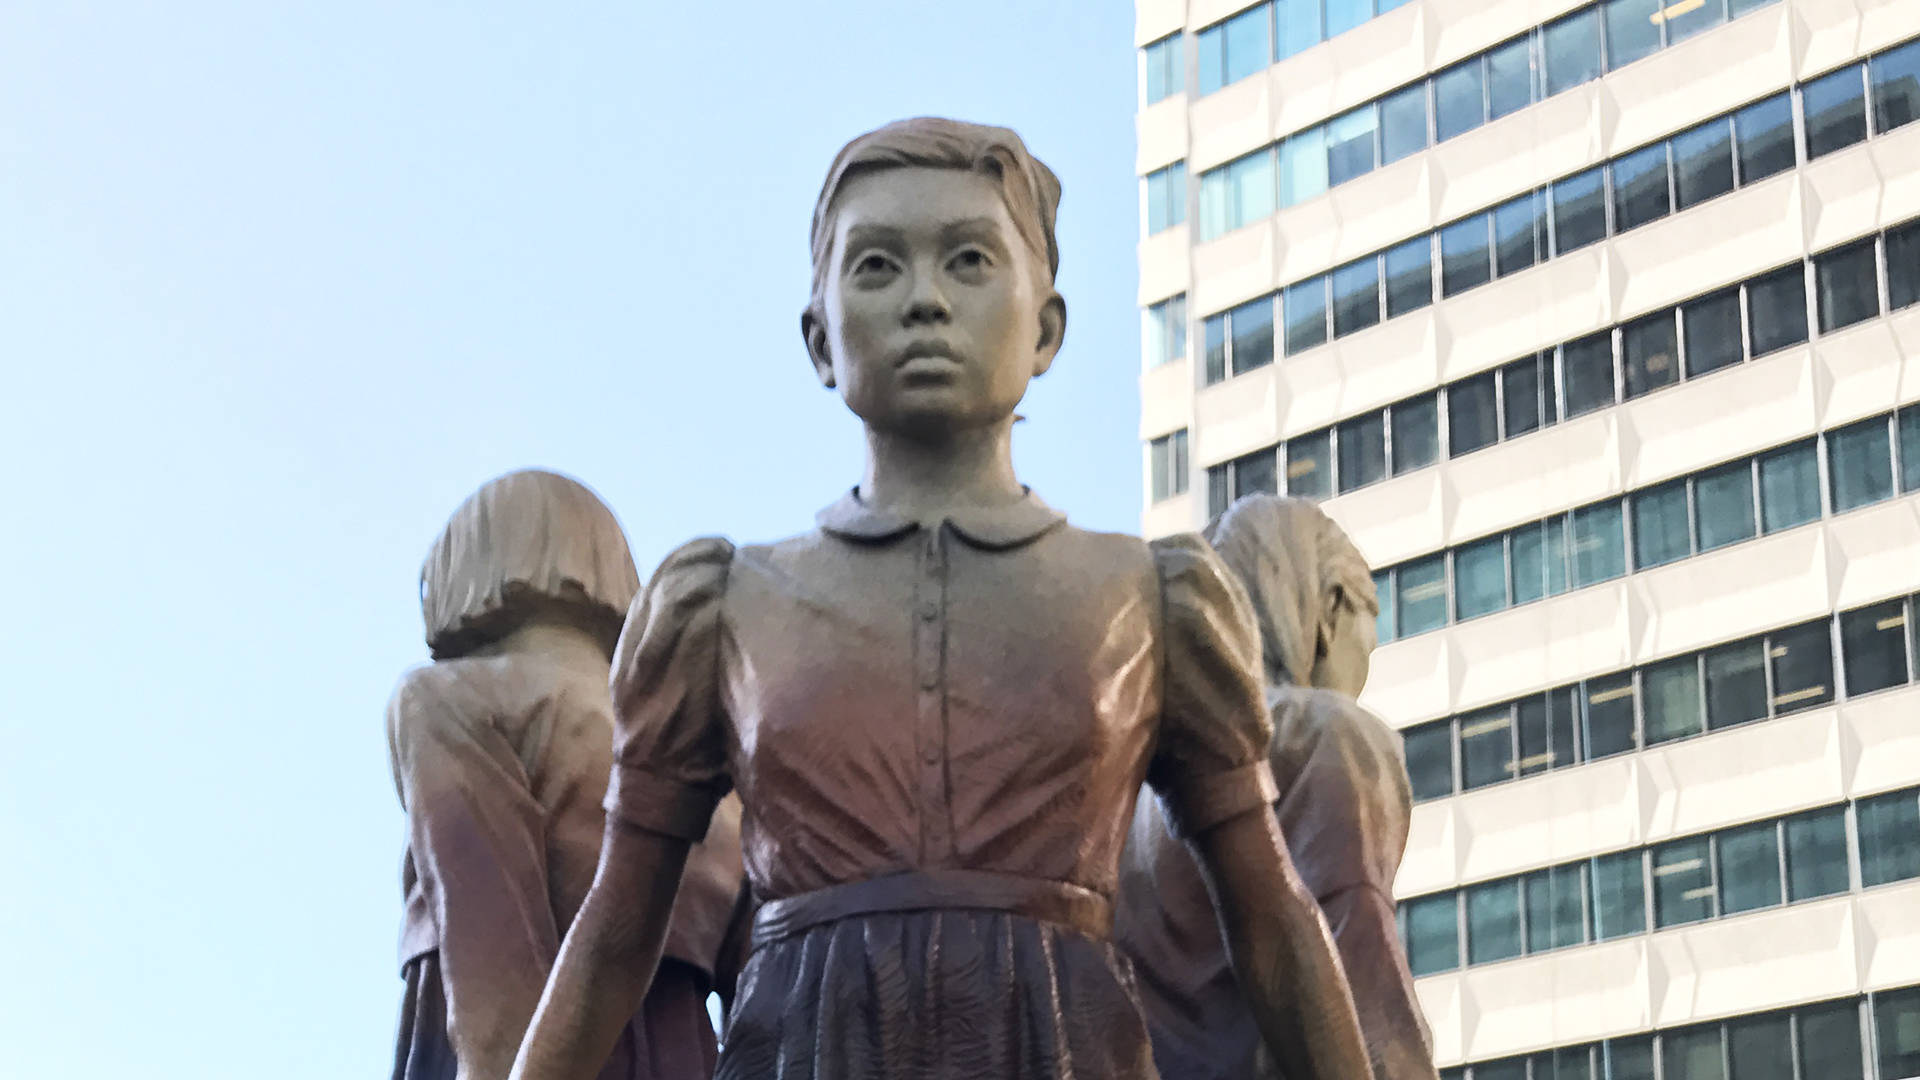 The Comfort Women memorial at St. Mary's Square in San Francisco Phyllis Kim